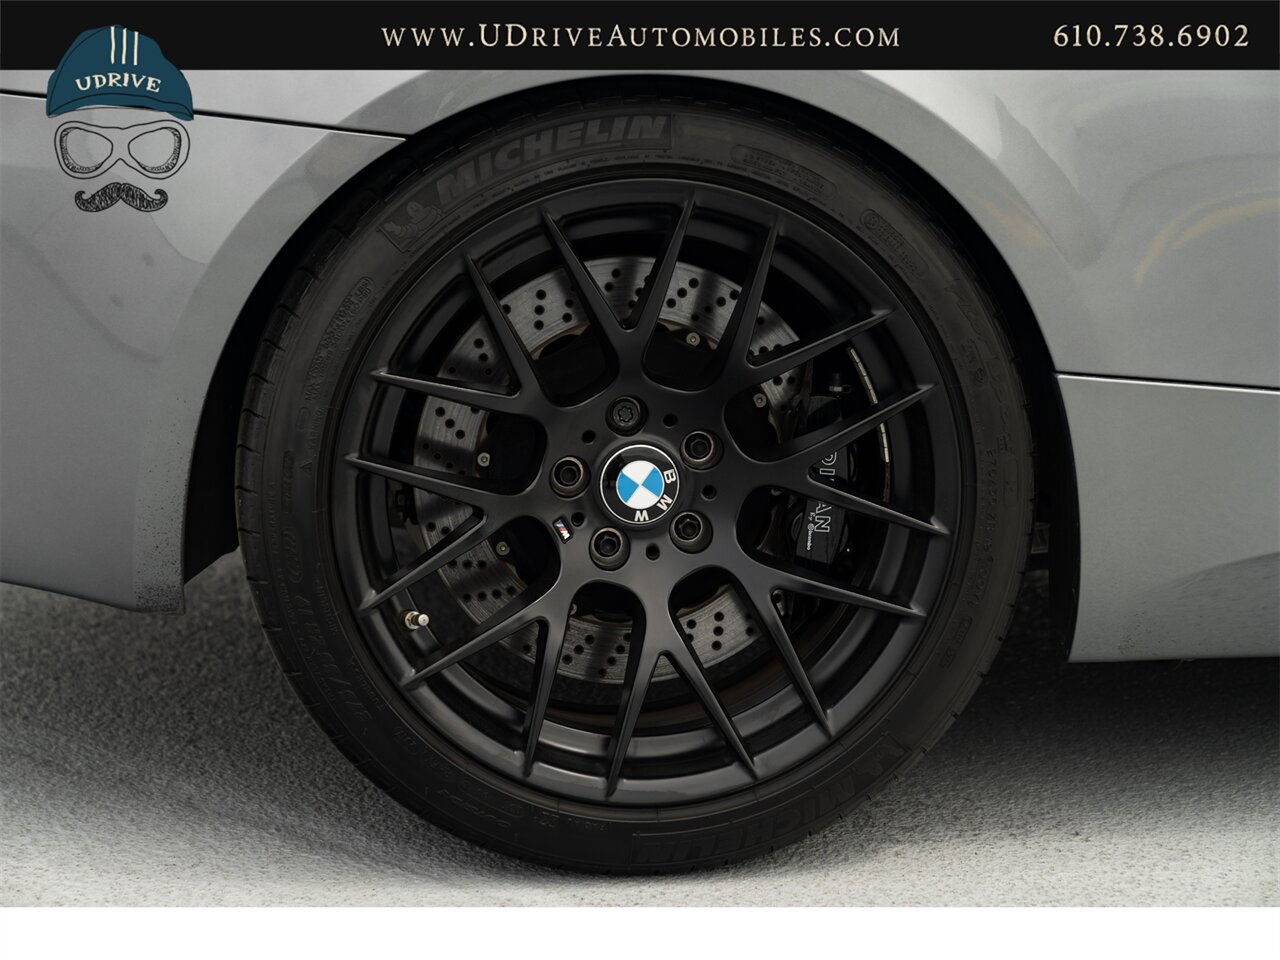 2012 BMW M3 E92 6 Speed 7k Miles Dinan Upgrades  GTS/359 Wheels Carbon Fiber Roof - Photo 56 - West Chester, PA 19382